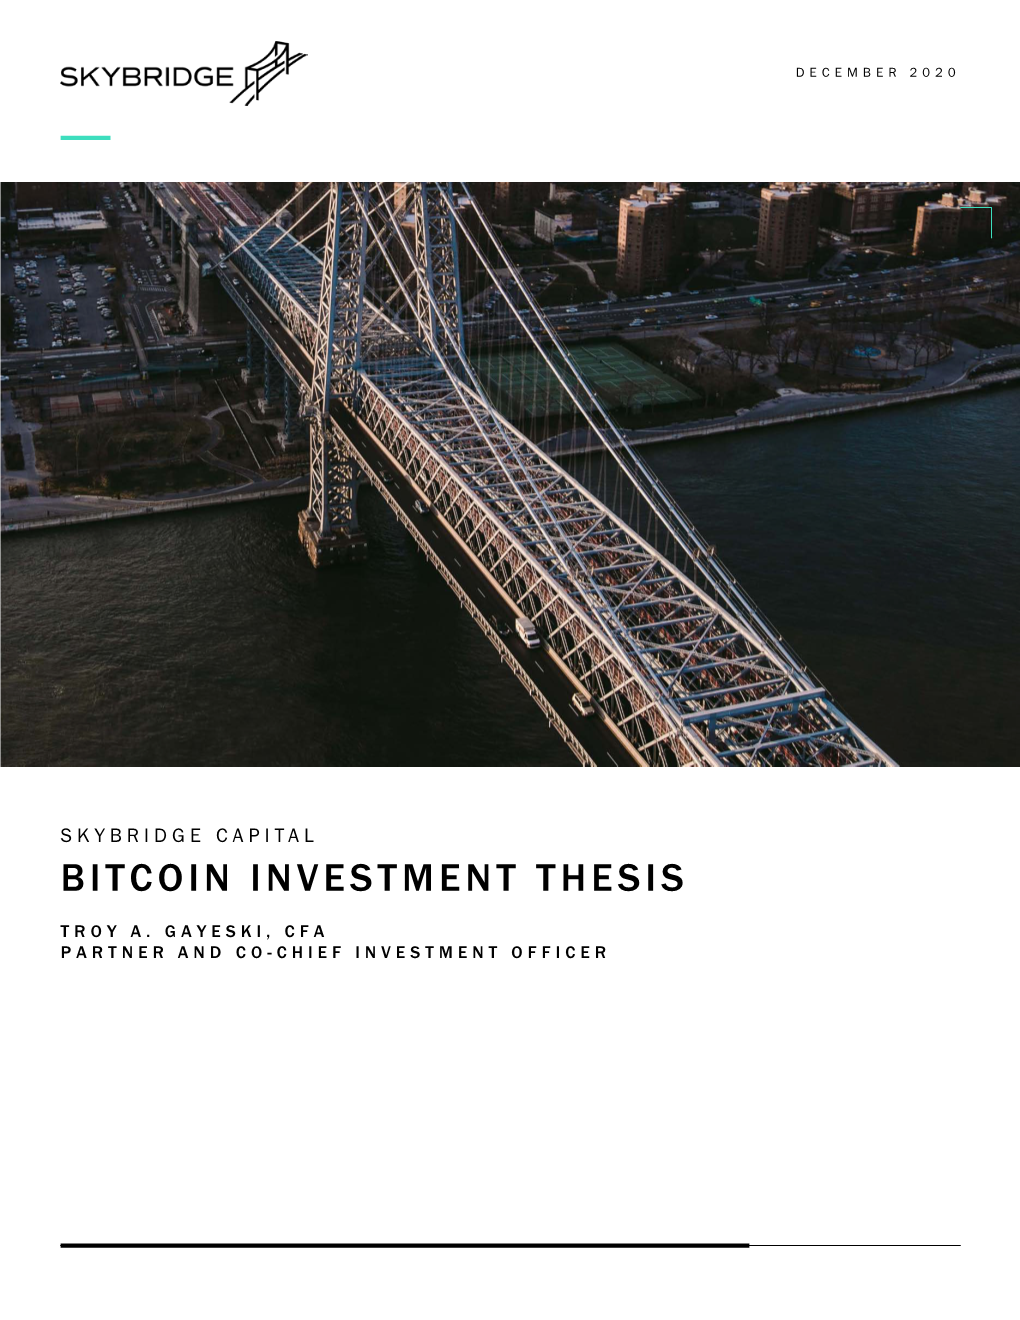 Bitcoin Investment Thesis